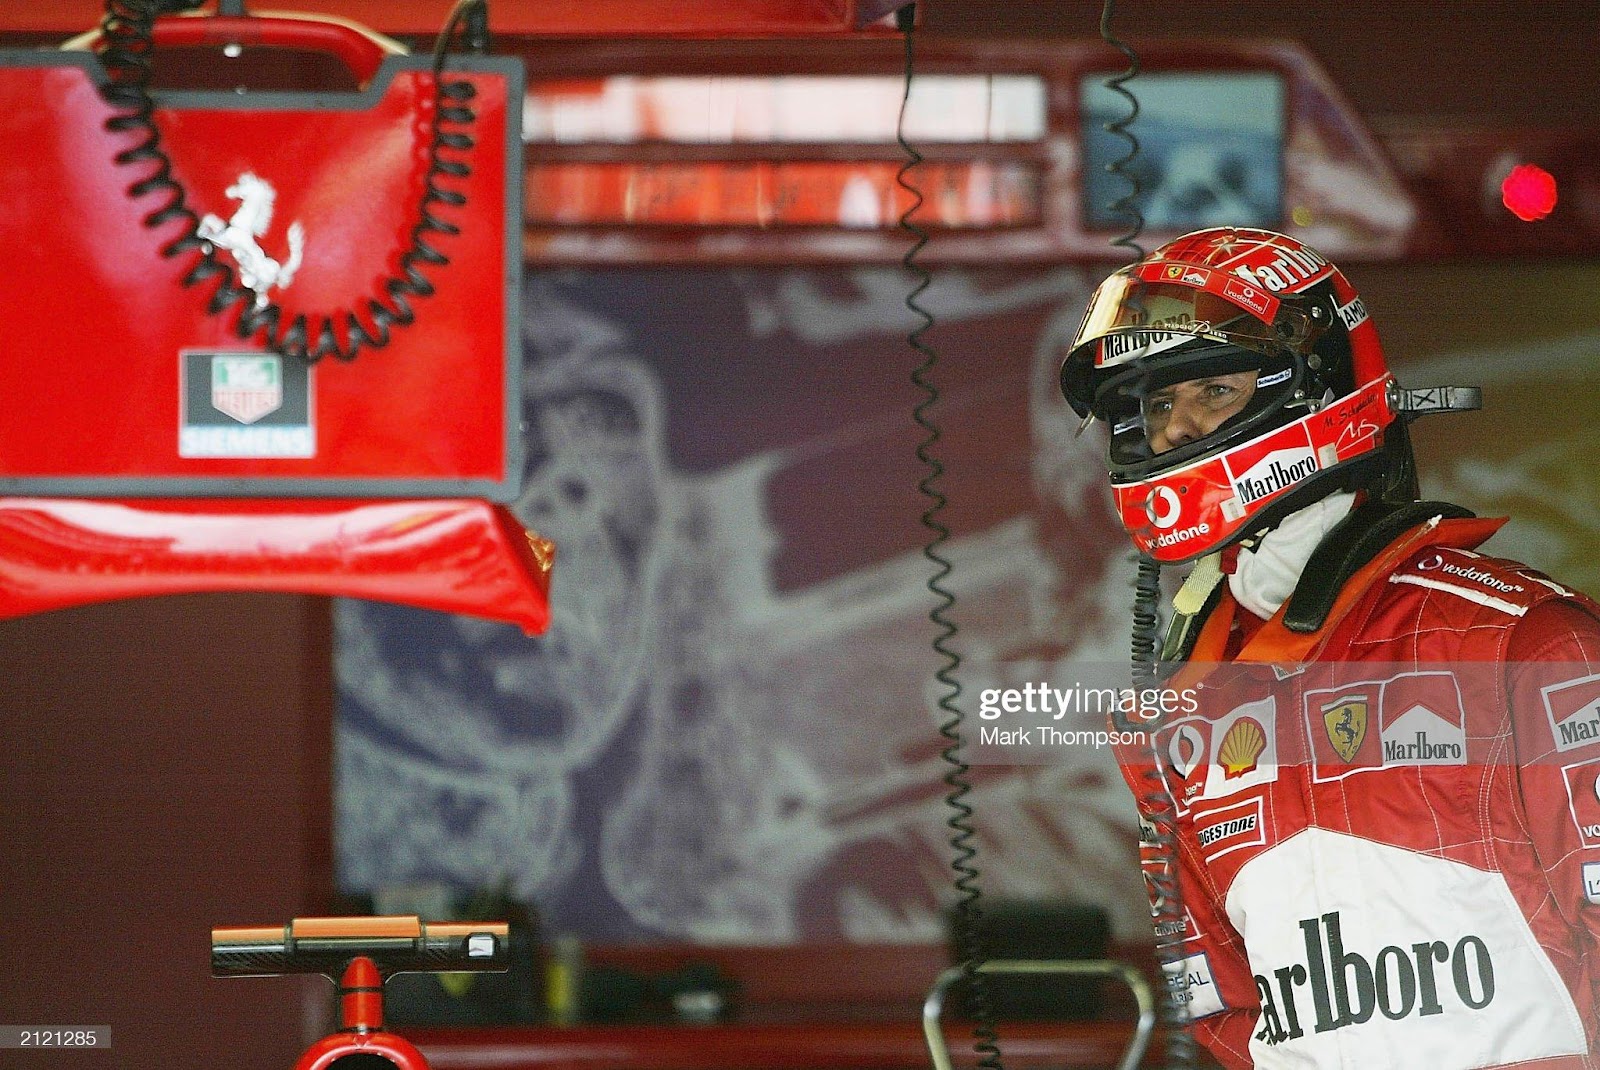 Michael Schumacher, Ferrari, prepares to qualify for the Formula One European Grand Prix at the Nurburgring on June 28, 2003 in Nurburg, Germany.